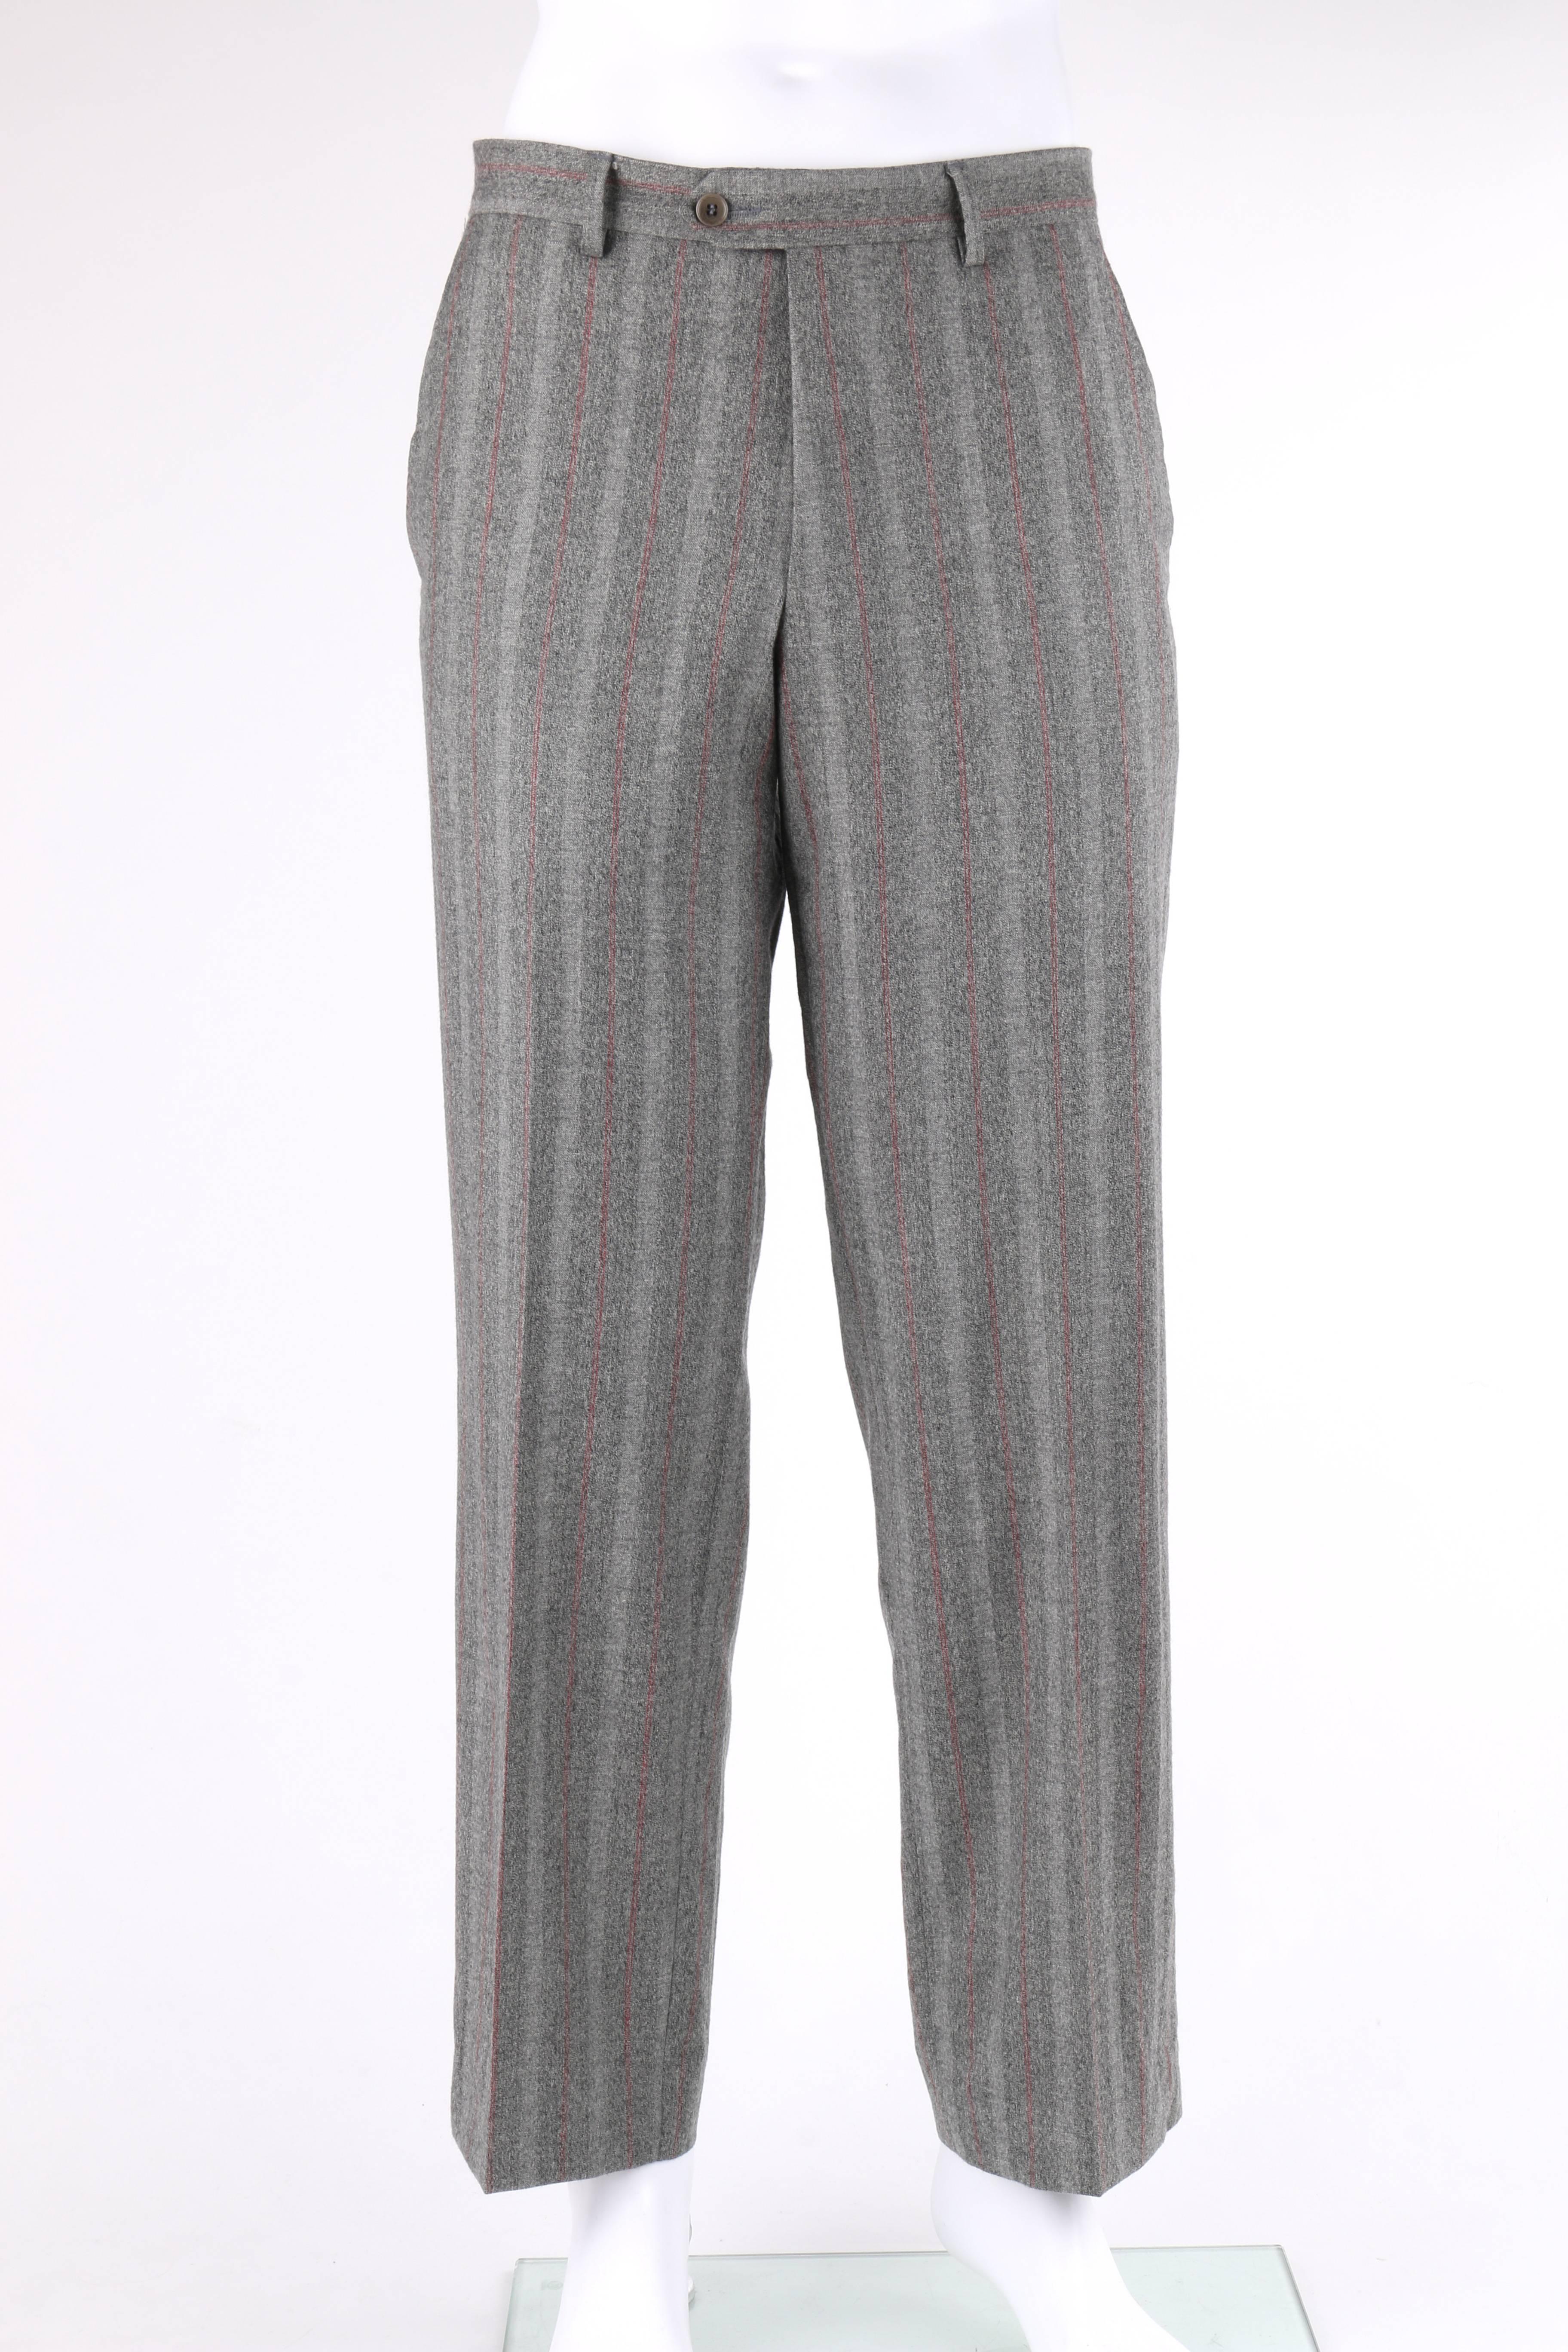 ALEXANDER McQUEEN c.2001 2 Pc Gray & Red Pinstripe Wool Jacket Pant Suit Set In Good Condition In Thiensville, WI